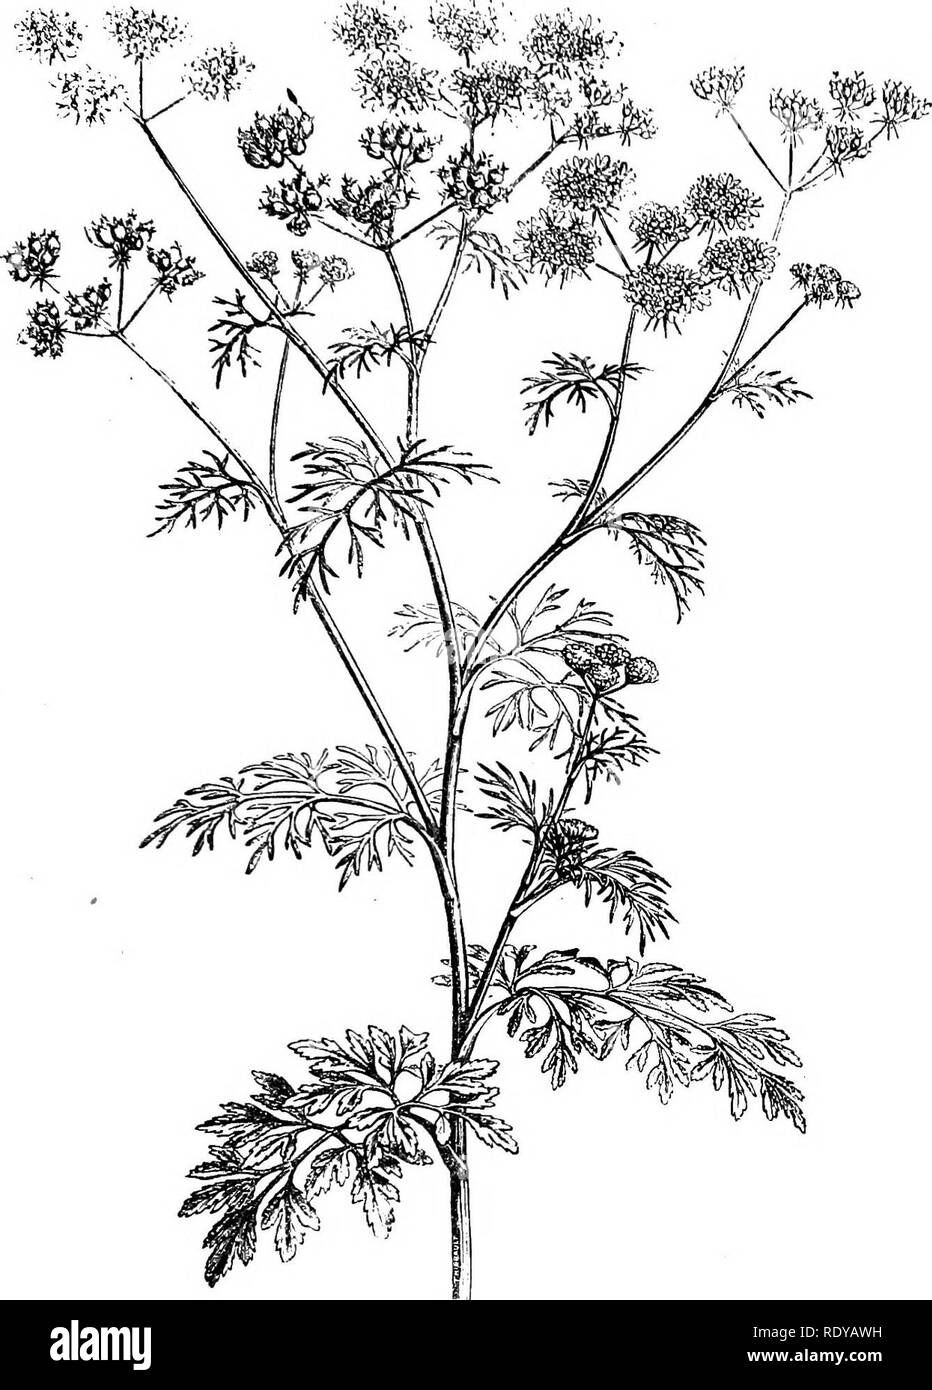 . A manual of poisonous plants, chiefly of eastern North America, with brief notes on economic and medicinal plants, and numerous illustrations. Poisonous plants. UMBELLIFERAE — OENANTHE 649. Fig- 369. Coriander (Coriandrum sativum'). Flowering stem. (After Faguet) contains phellandrene; a native lovage, Ligusticum canadense, is used to flavor tobacco. This family contains a large number of plants with active principles, some of which are entirely harmless, but others must be considered among the deadly poisons. The water drop-wort (Oenanthe crocata), with its parsnip-like roots, »nd the 0. Ph Stock Photo